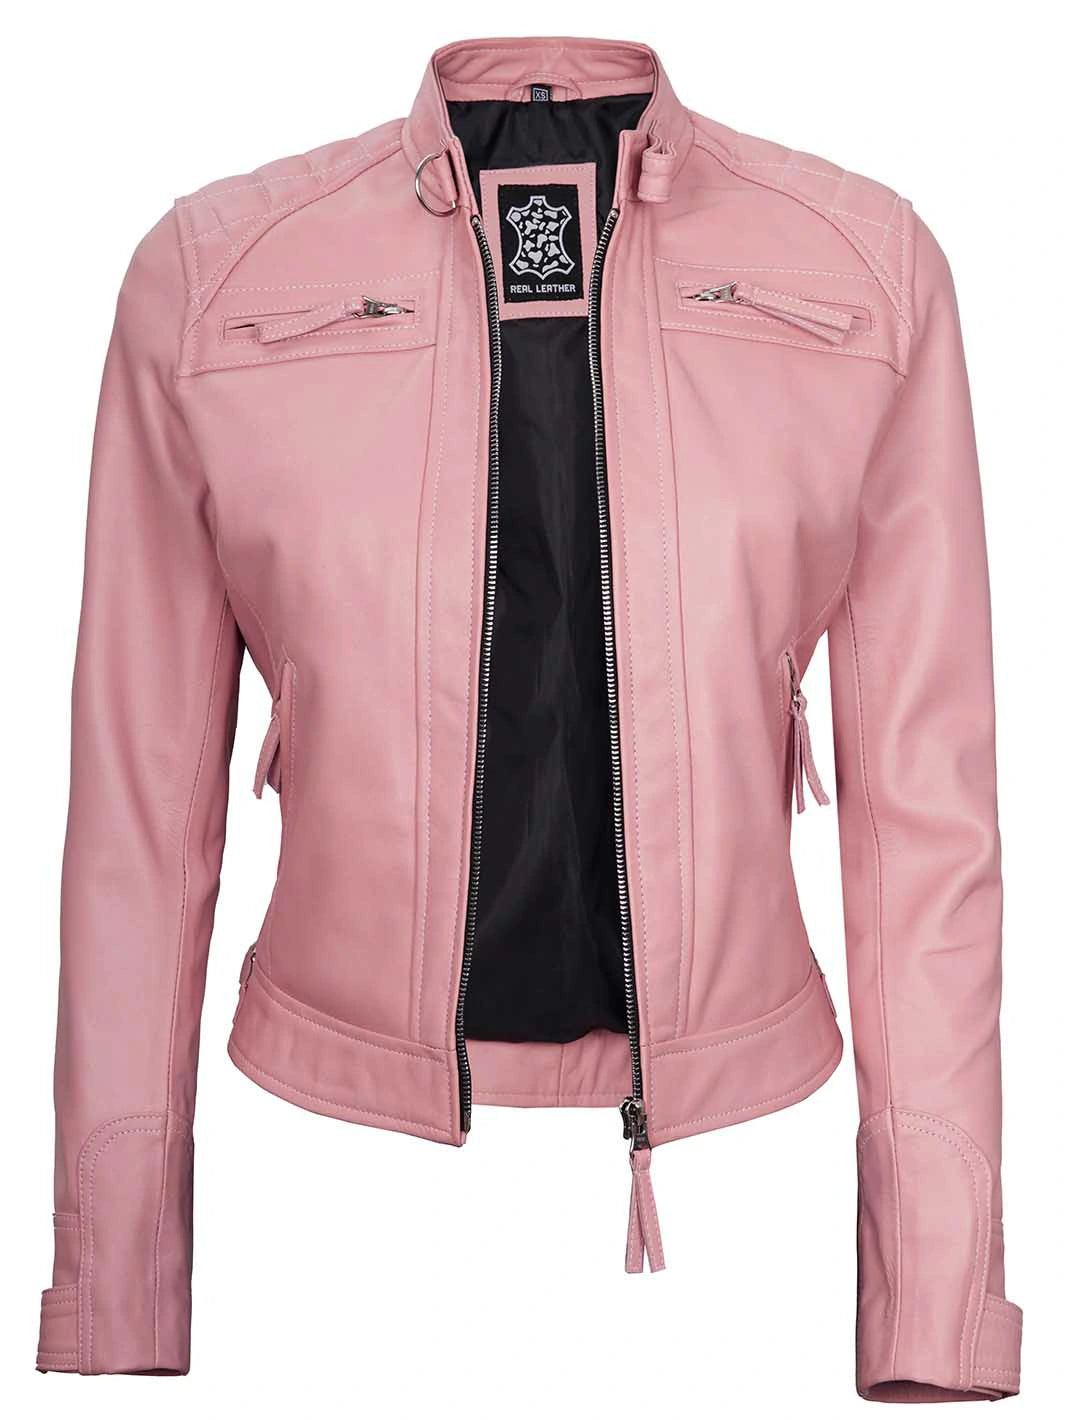 Womens pink leather jacket